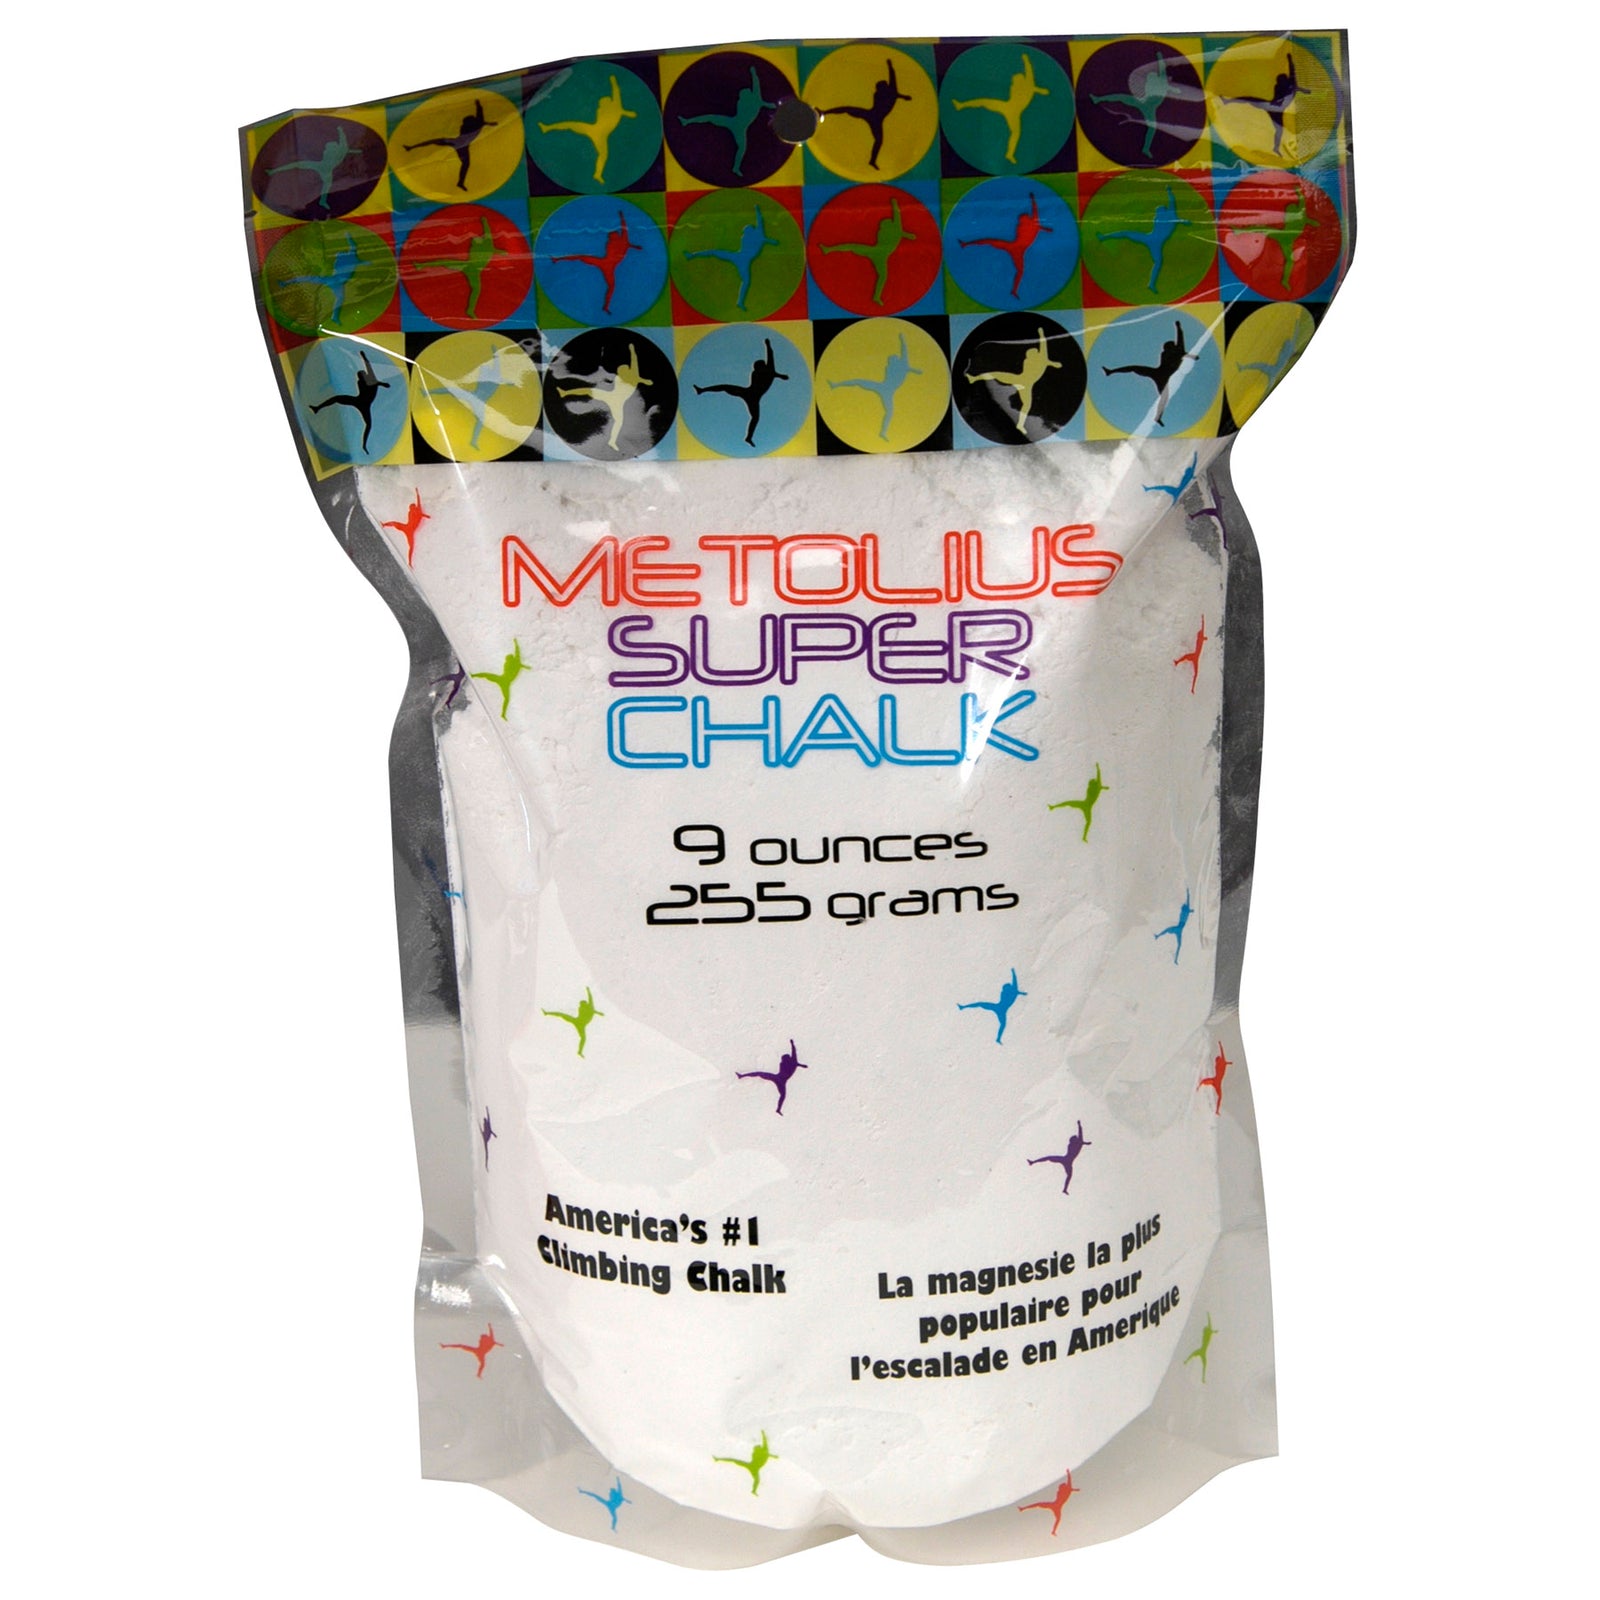 a photo of the package of 9oz metolius chalk